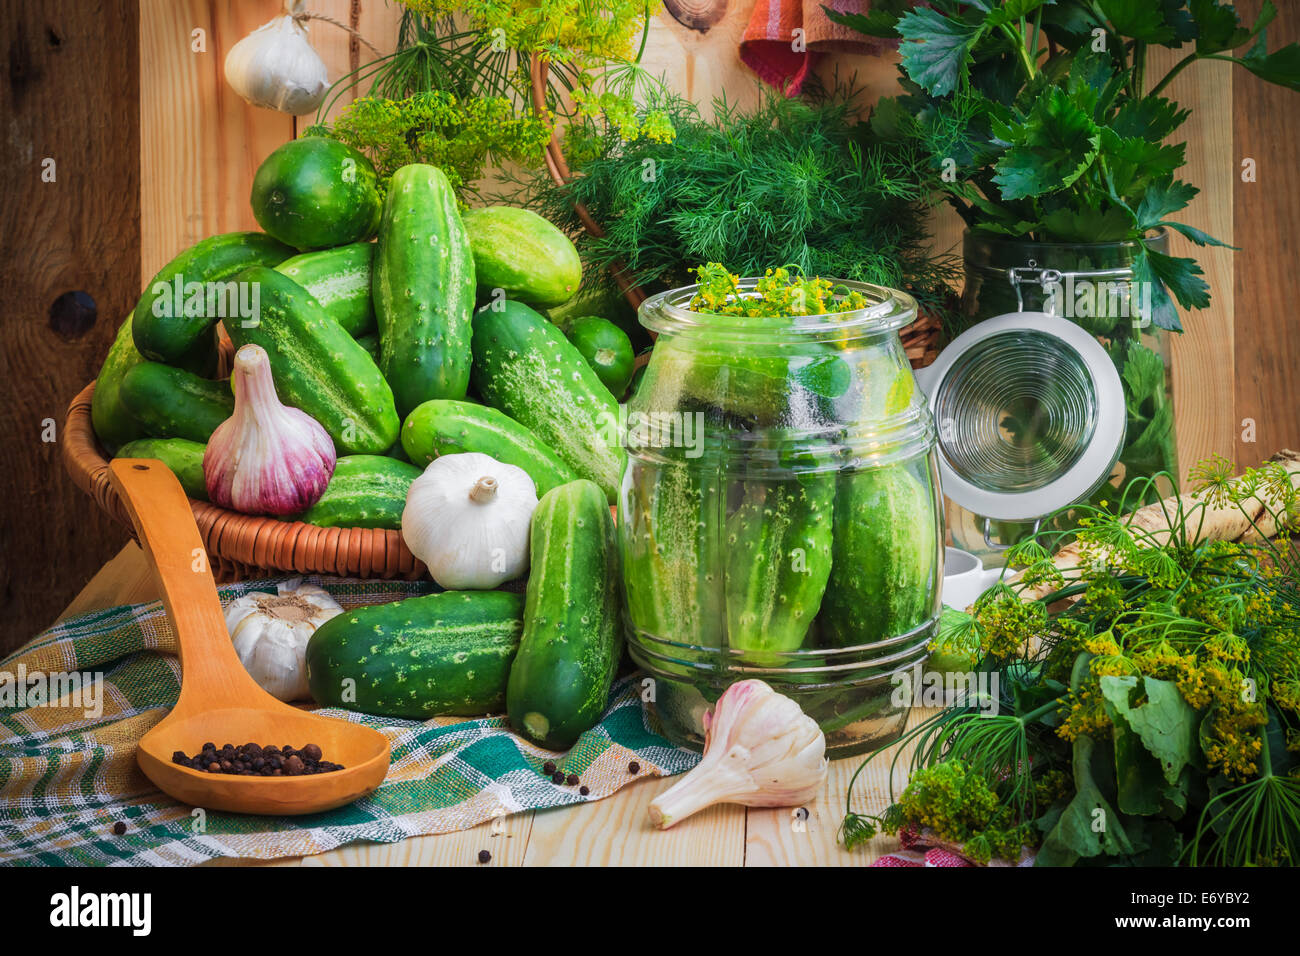 Jar of pickles and other ingredients for pickling Stock Photo